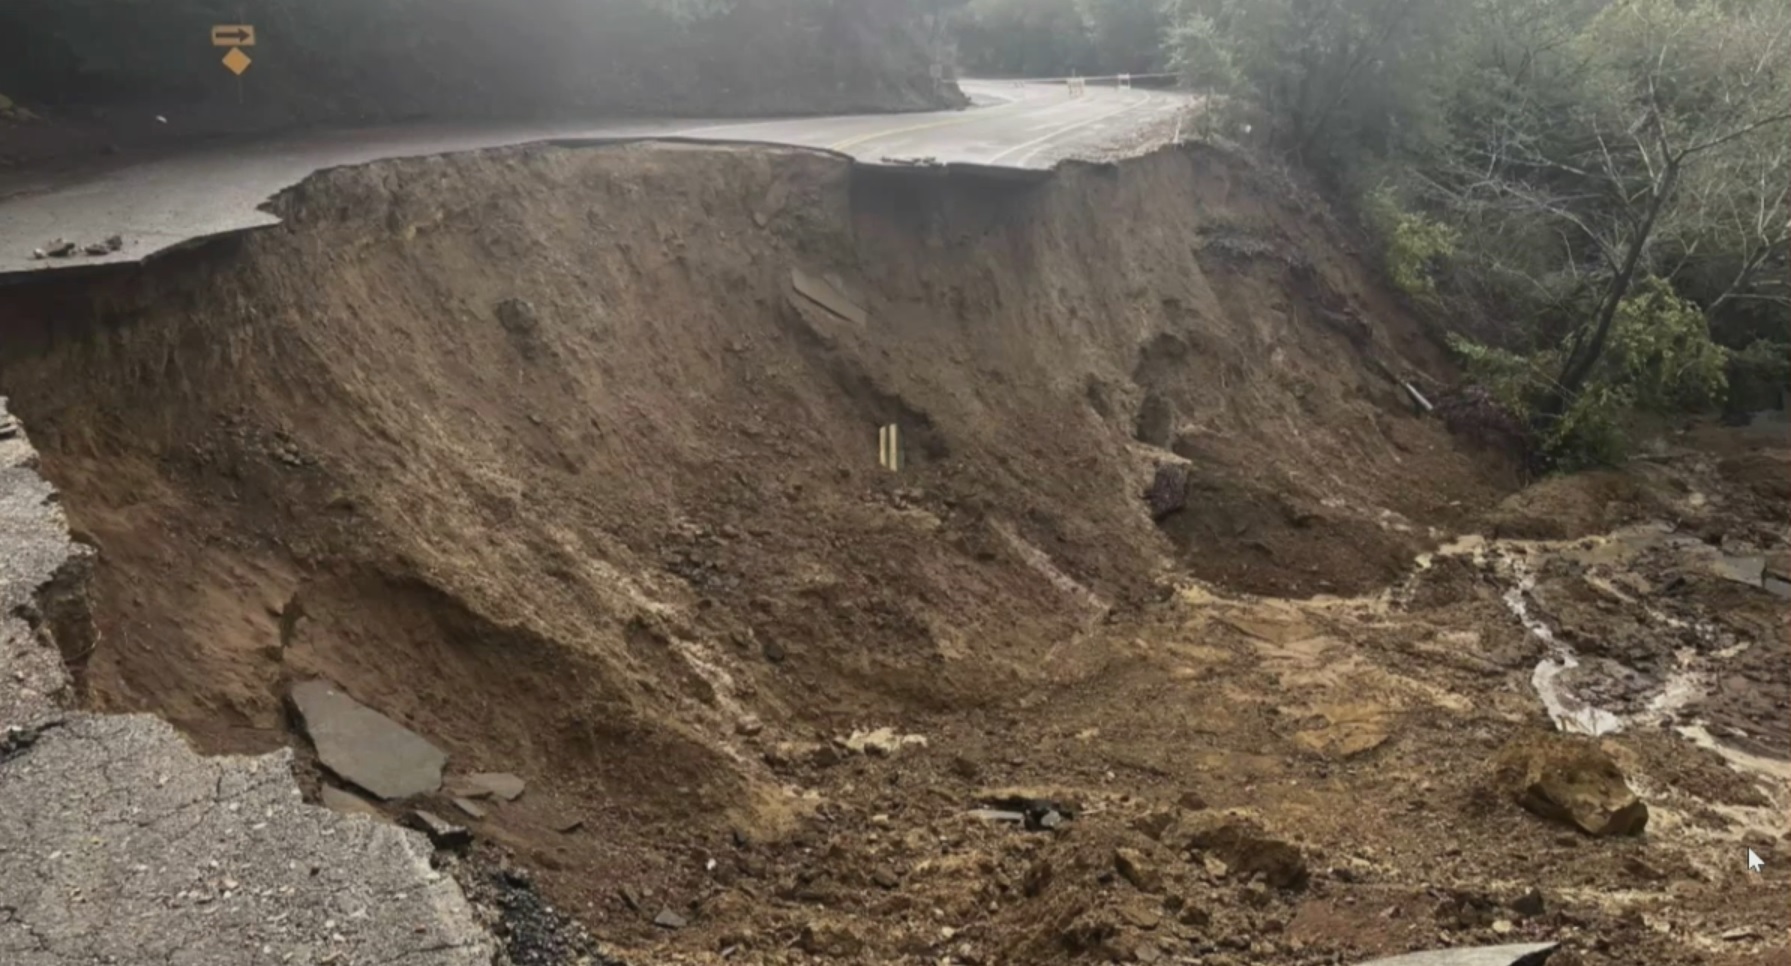 The recent storms caused extensive damage to some county roadways, such as Redwood Road (photographed), which may take a while to reopen. (Credit: Alameda County Public Works Agency)